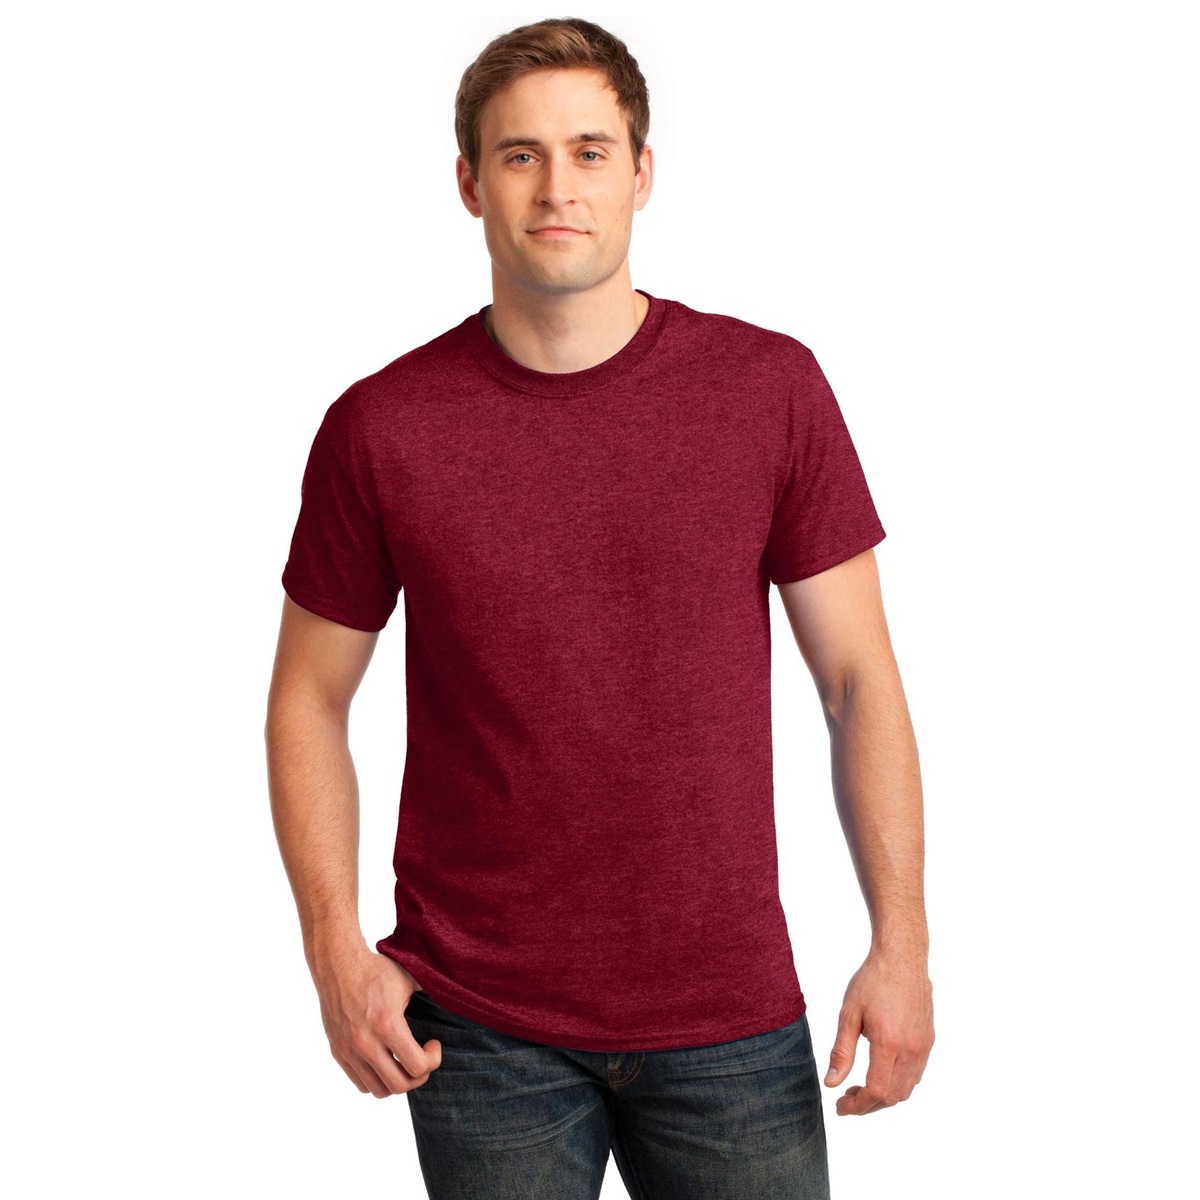 cherry red color shirt